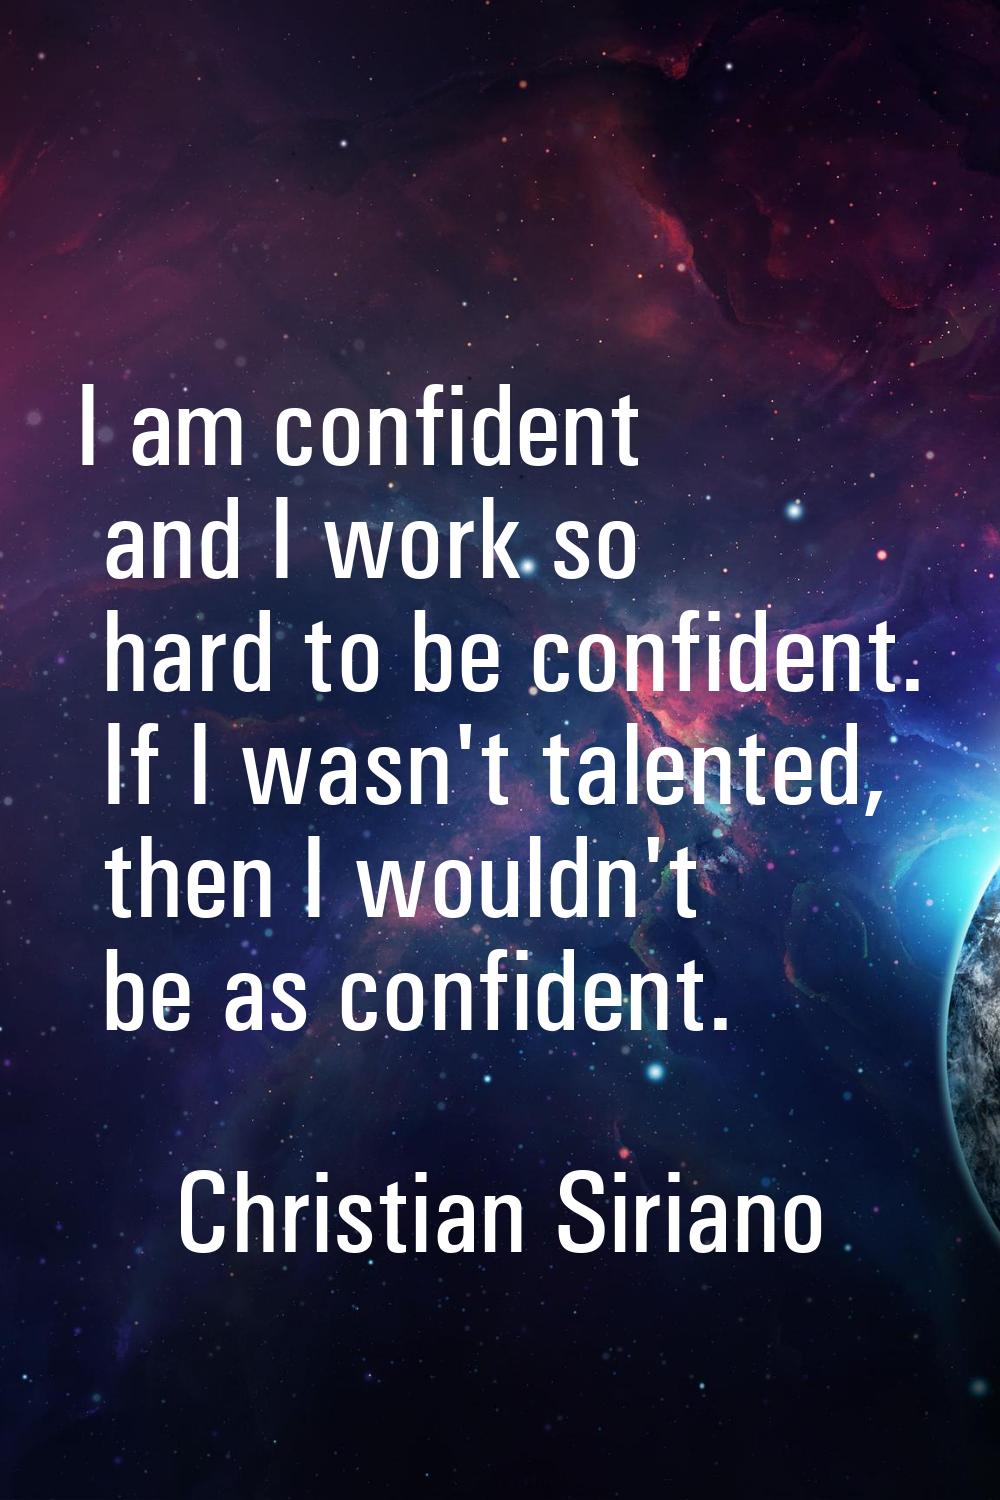 I am confident and I work so hard to be confident. If I wasn't talented, then I wouldn't be as conf